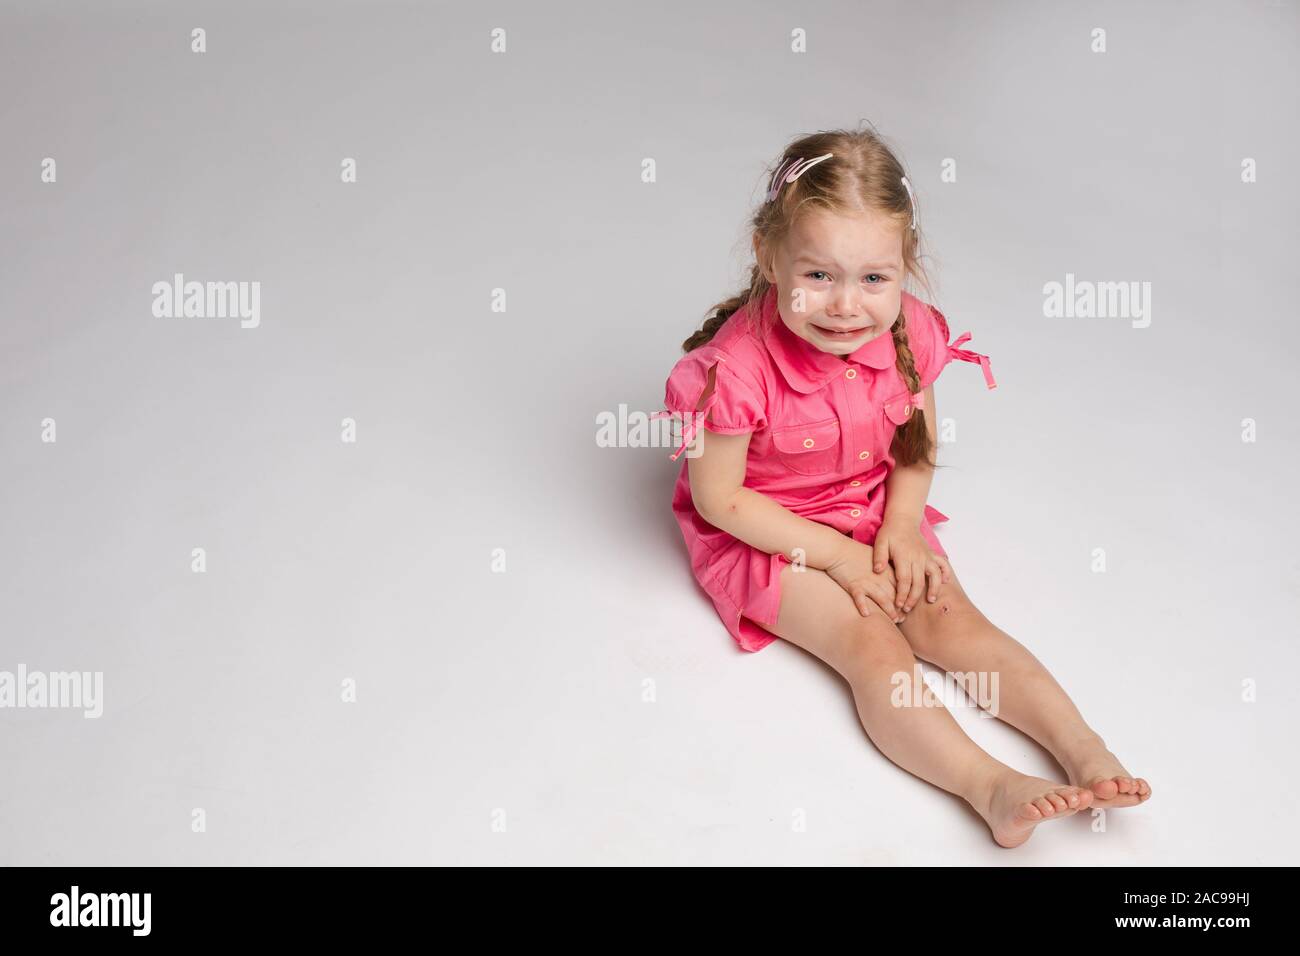 Adorable kid crying on the floor. She is looking at the camera while sobbing. Stock Photo